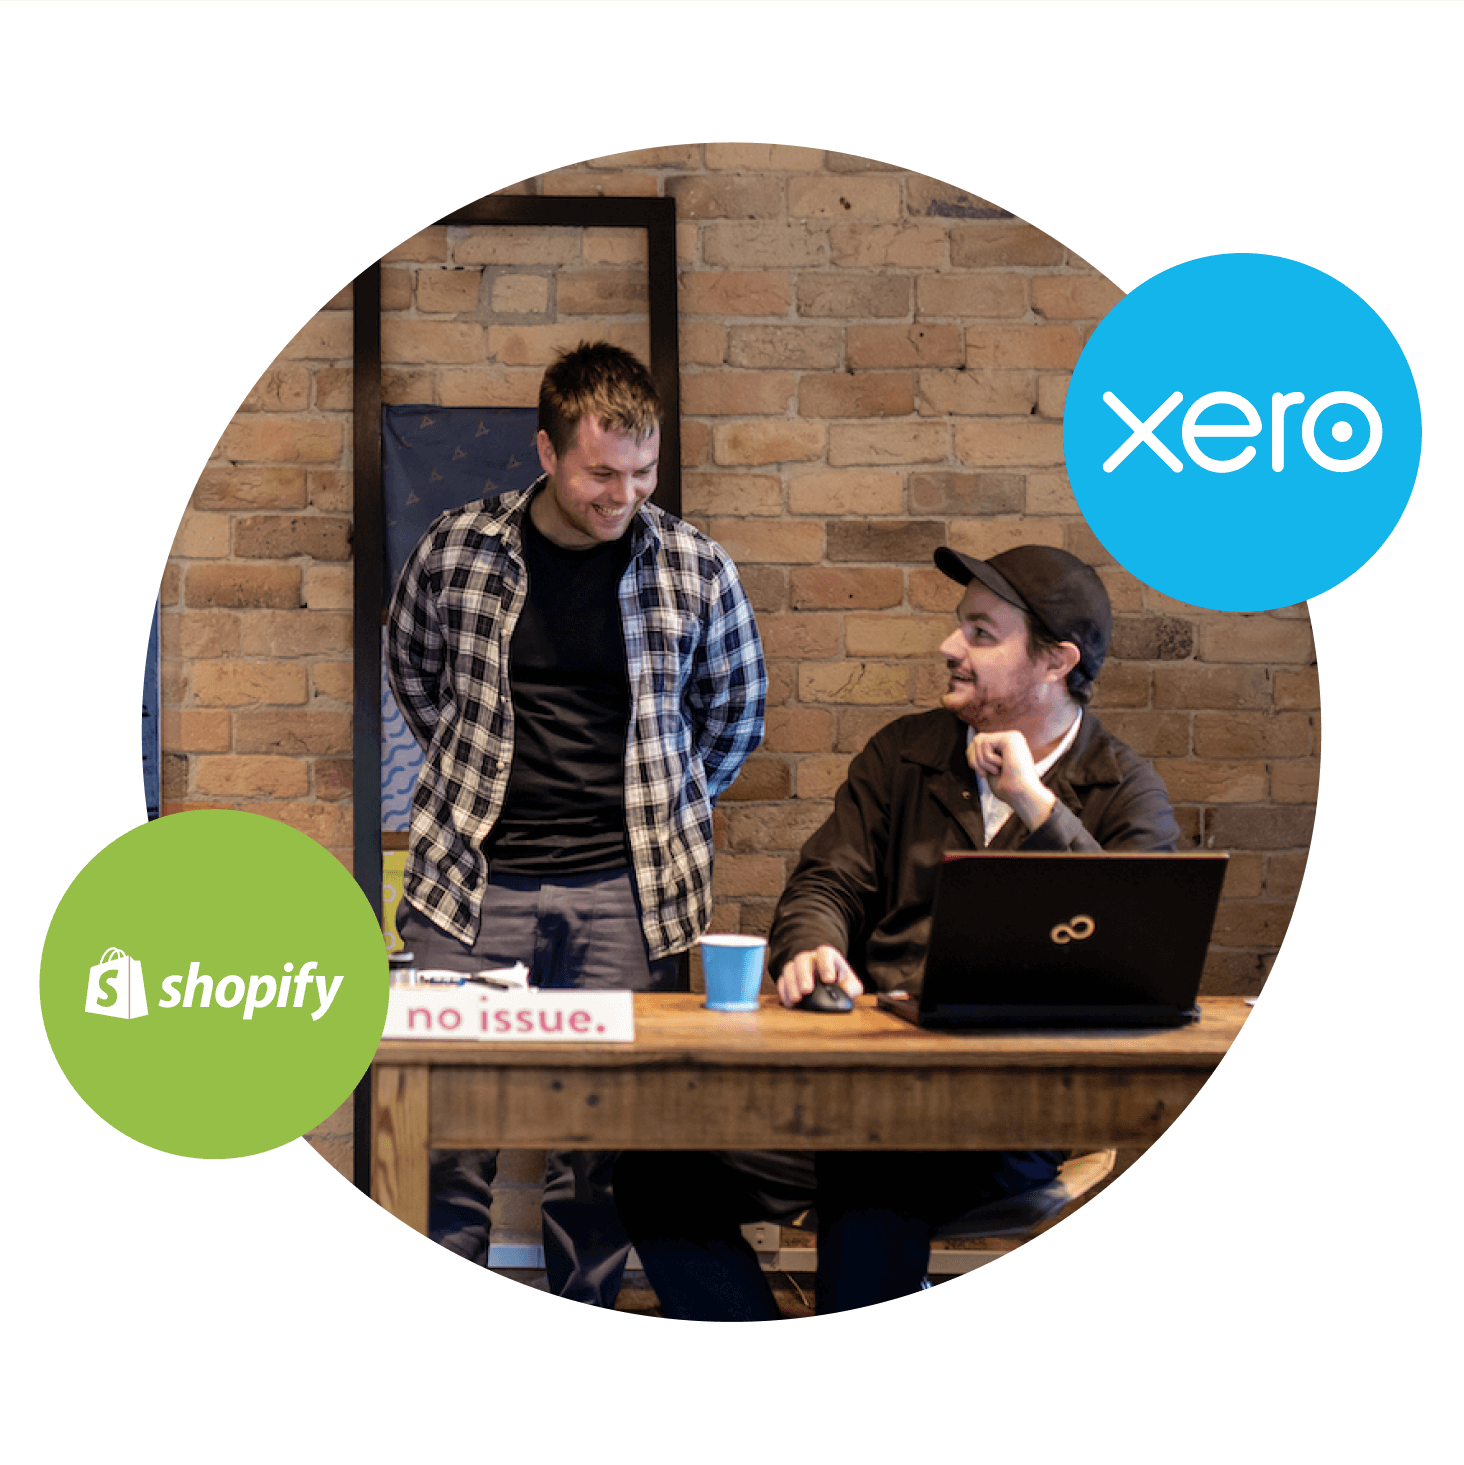 Two Canadian ecommerce sellers chat about the increase in sales since using Shopify and Xero for their online store.